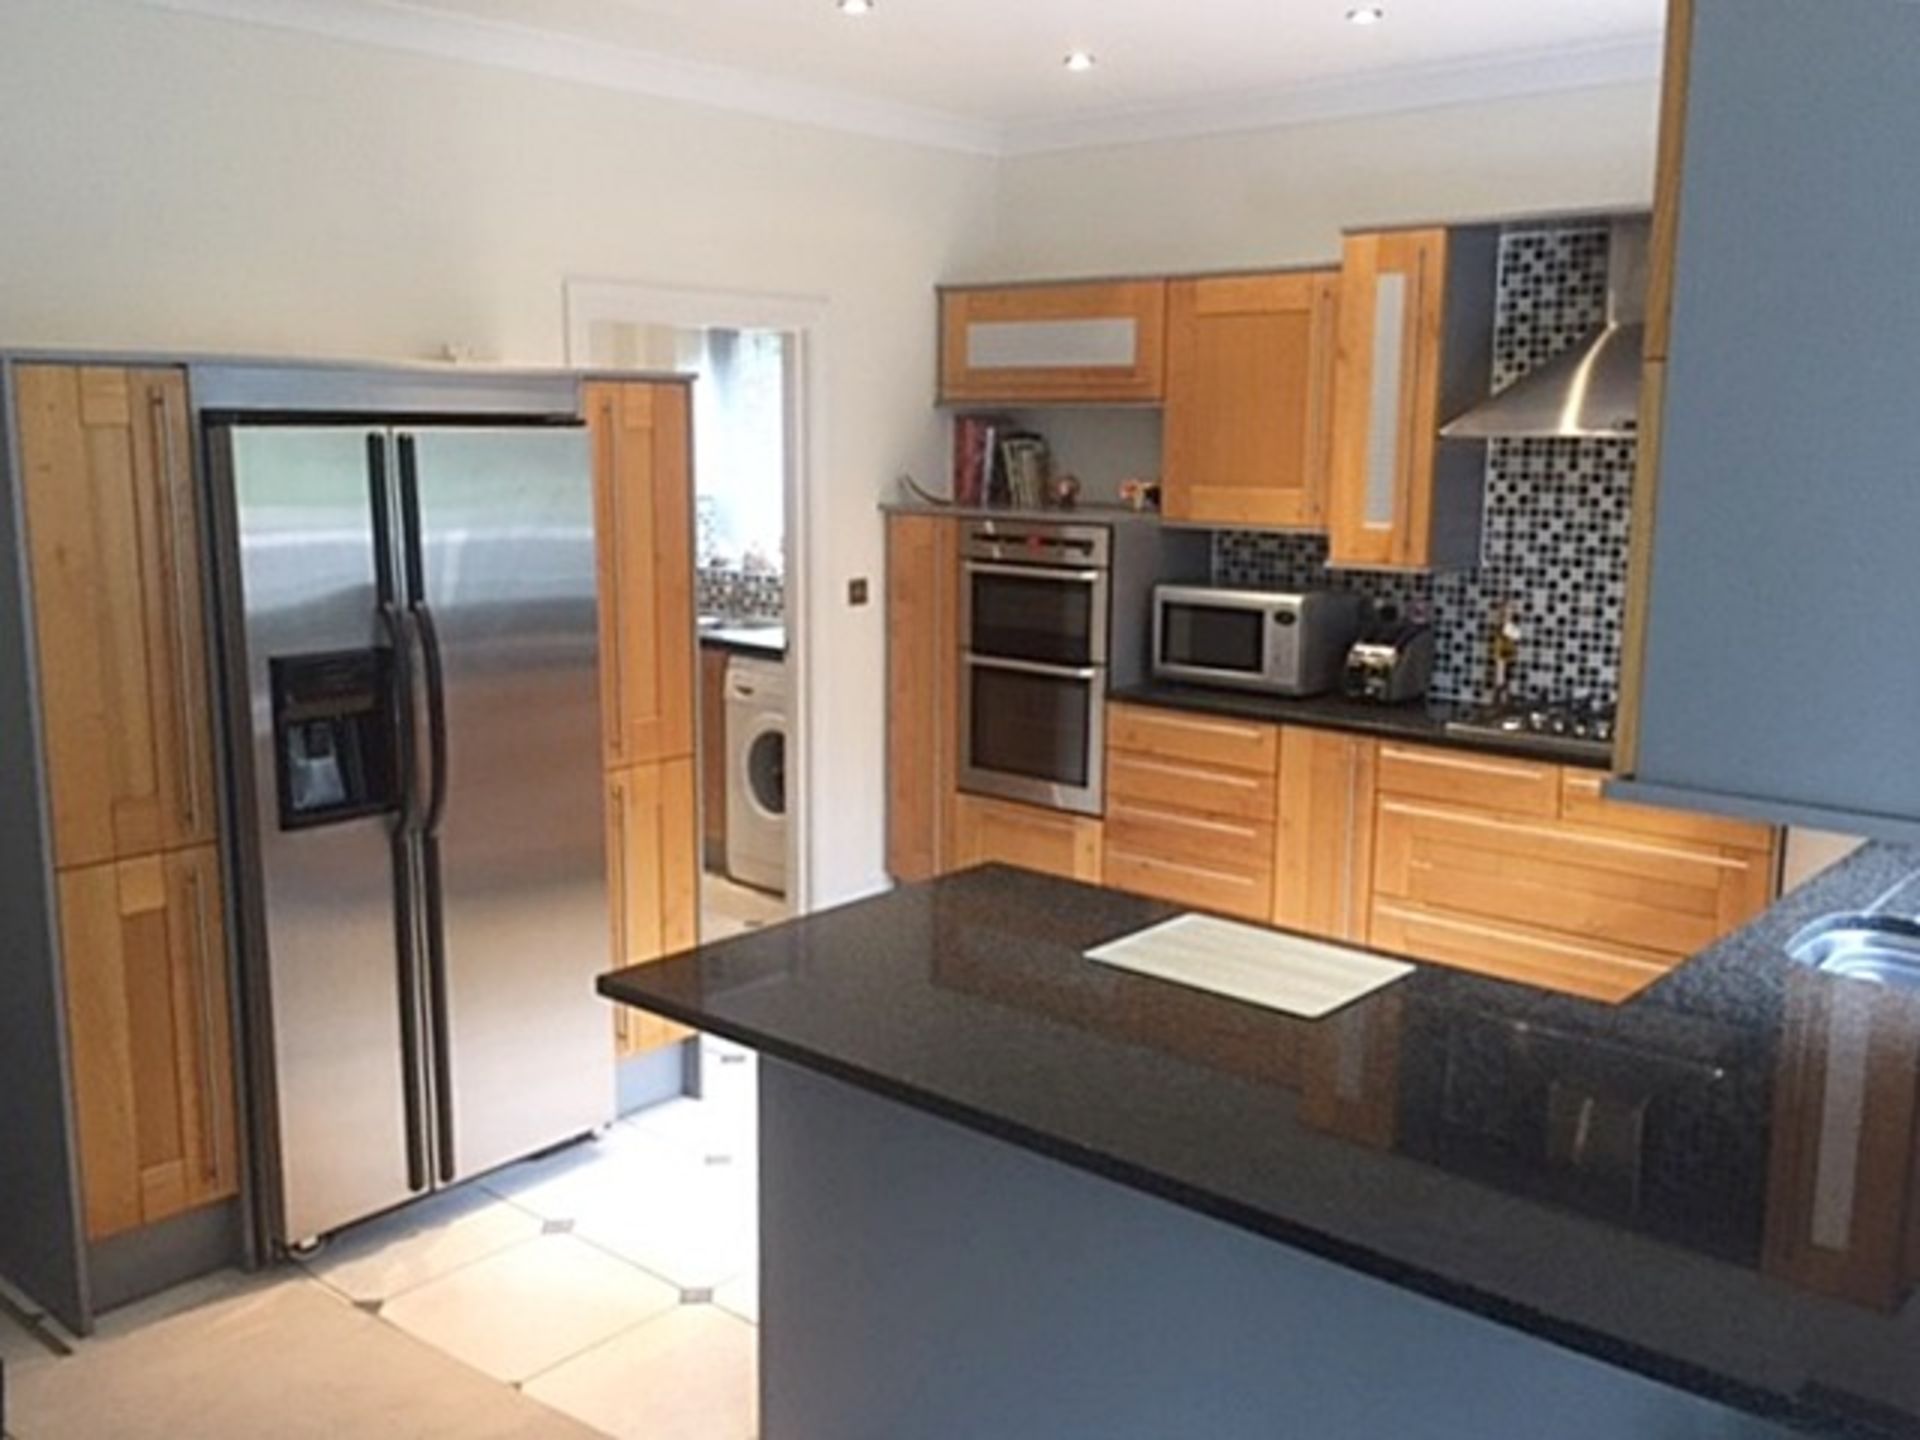 1 x Solid Wood Fitted Kitchen By Panorama - Features Luxurious Black Granite Worktops, Integrated - Image 19 of 31